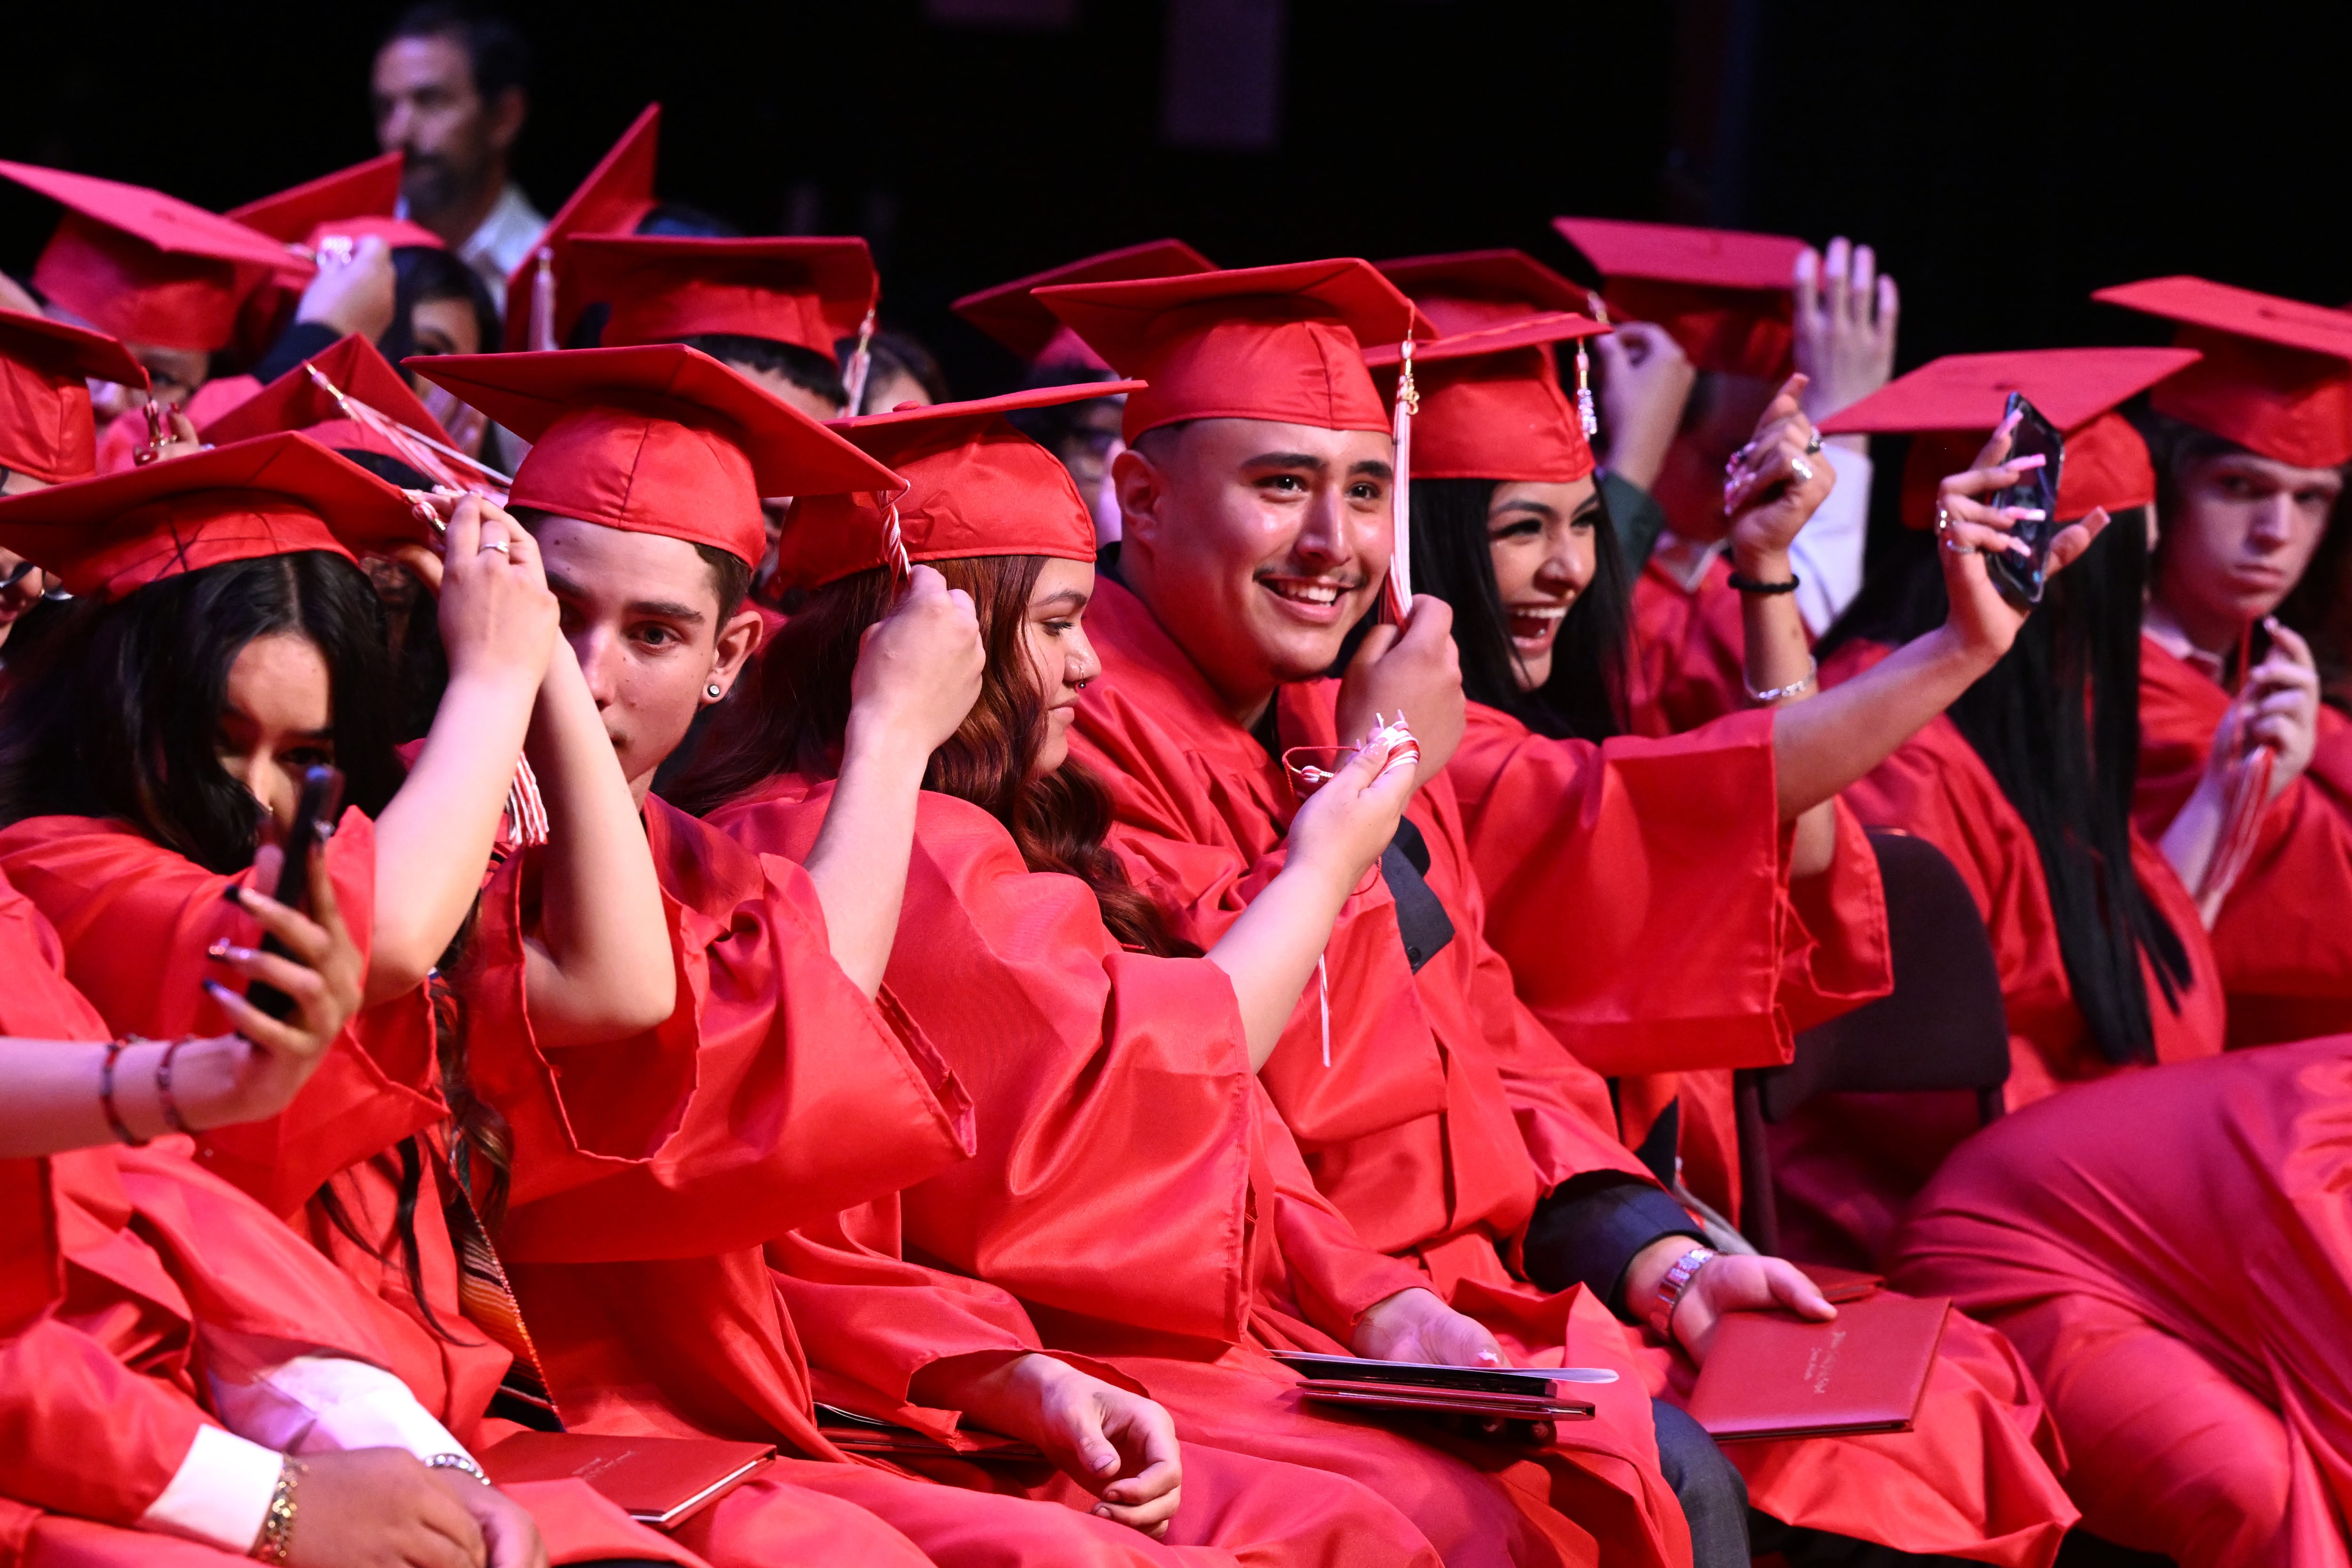 High school graduates in red caps and gowns.